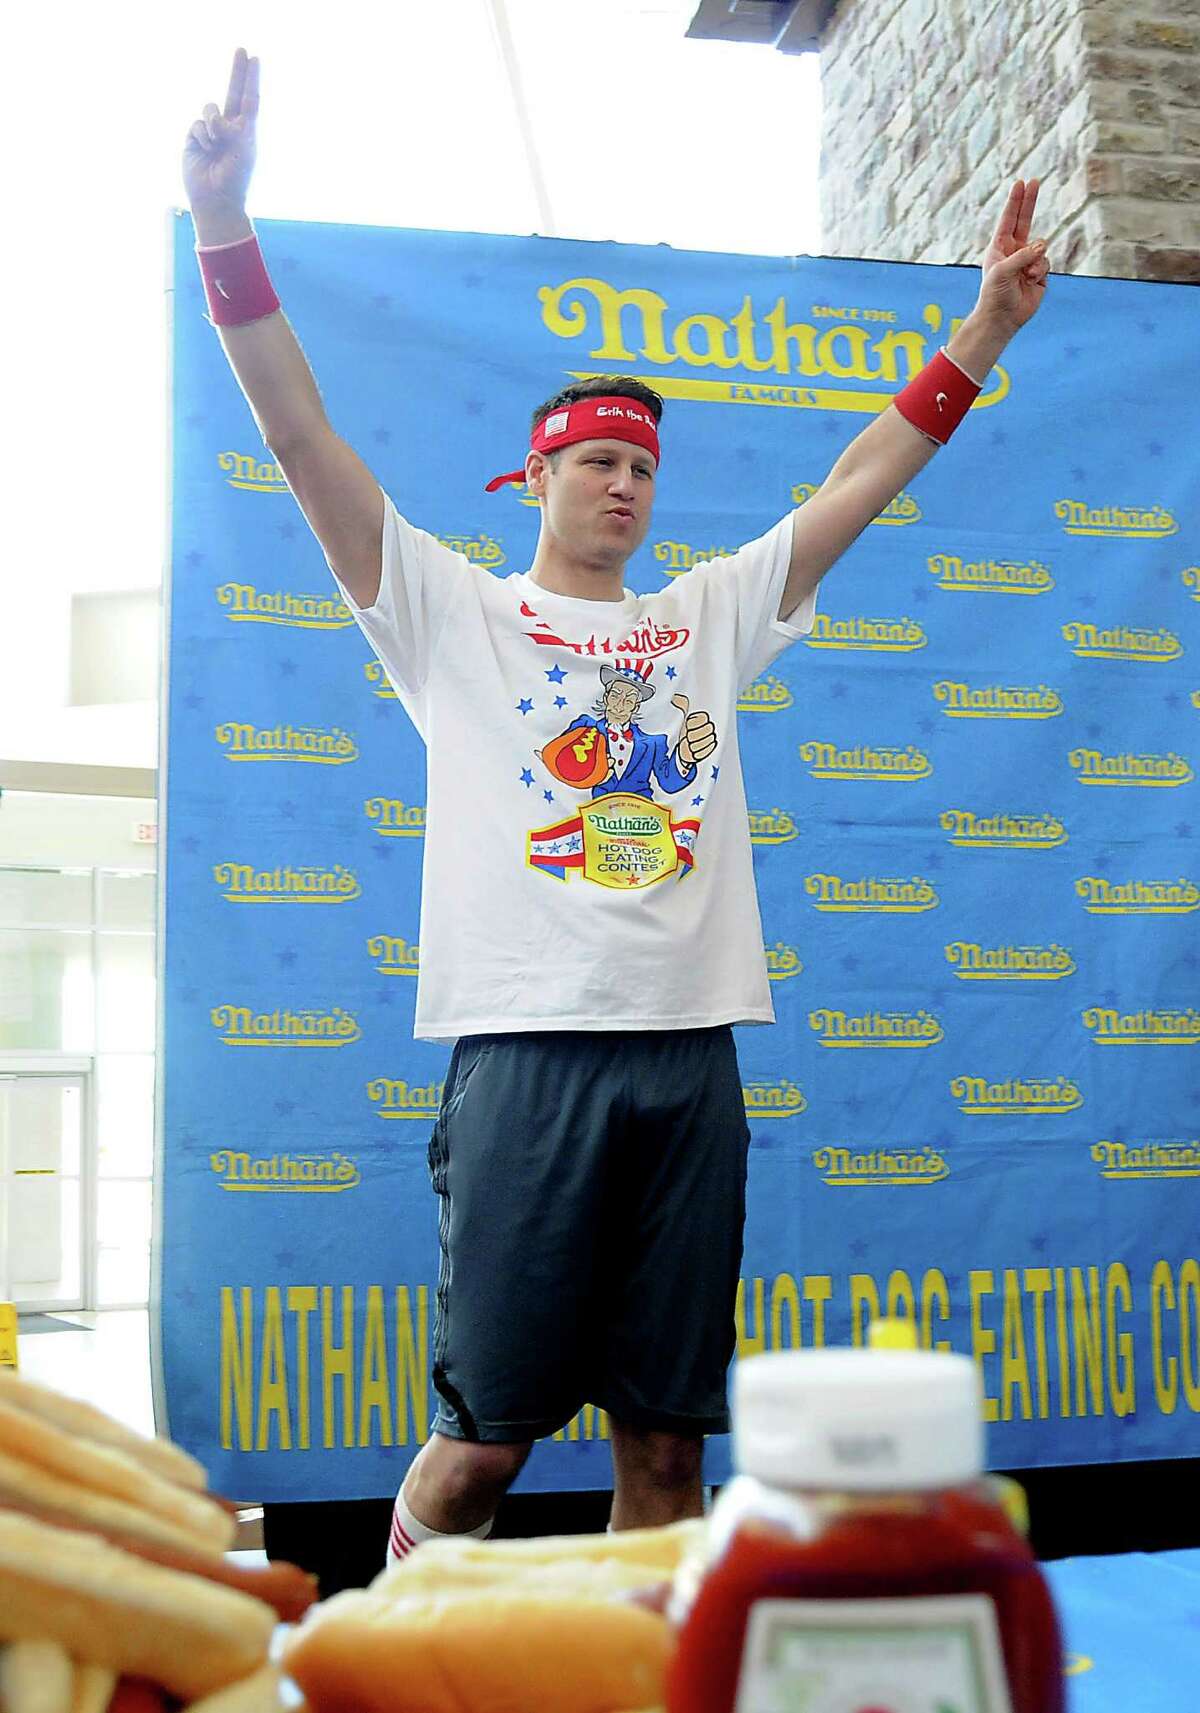 Mens favorite Erik "The Red" Denmark takes the stage at the Nathan's Famous Hot Dog Eating Contest regional qualifier at Memorial City Mall Saturday May 03, 2014.(Dave Rossman photo)